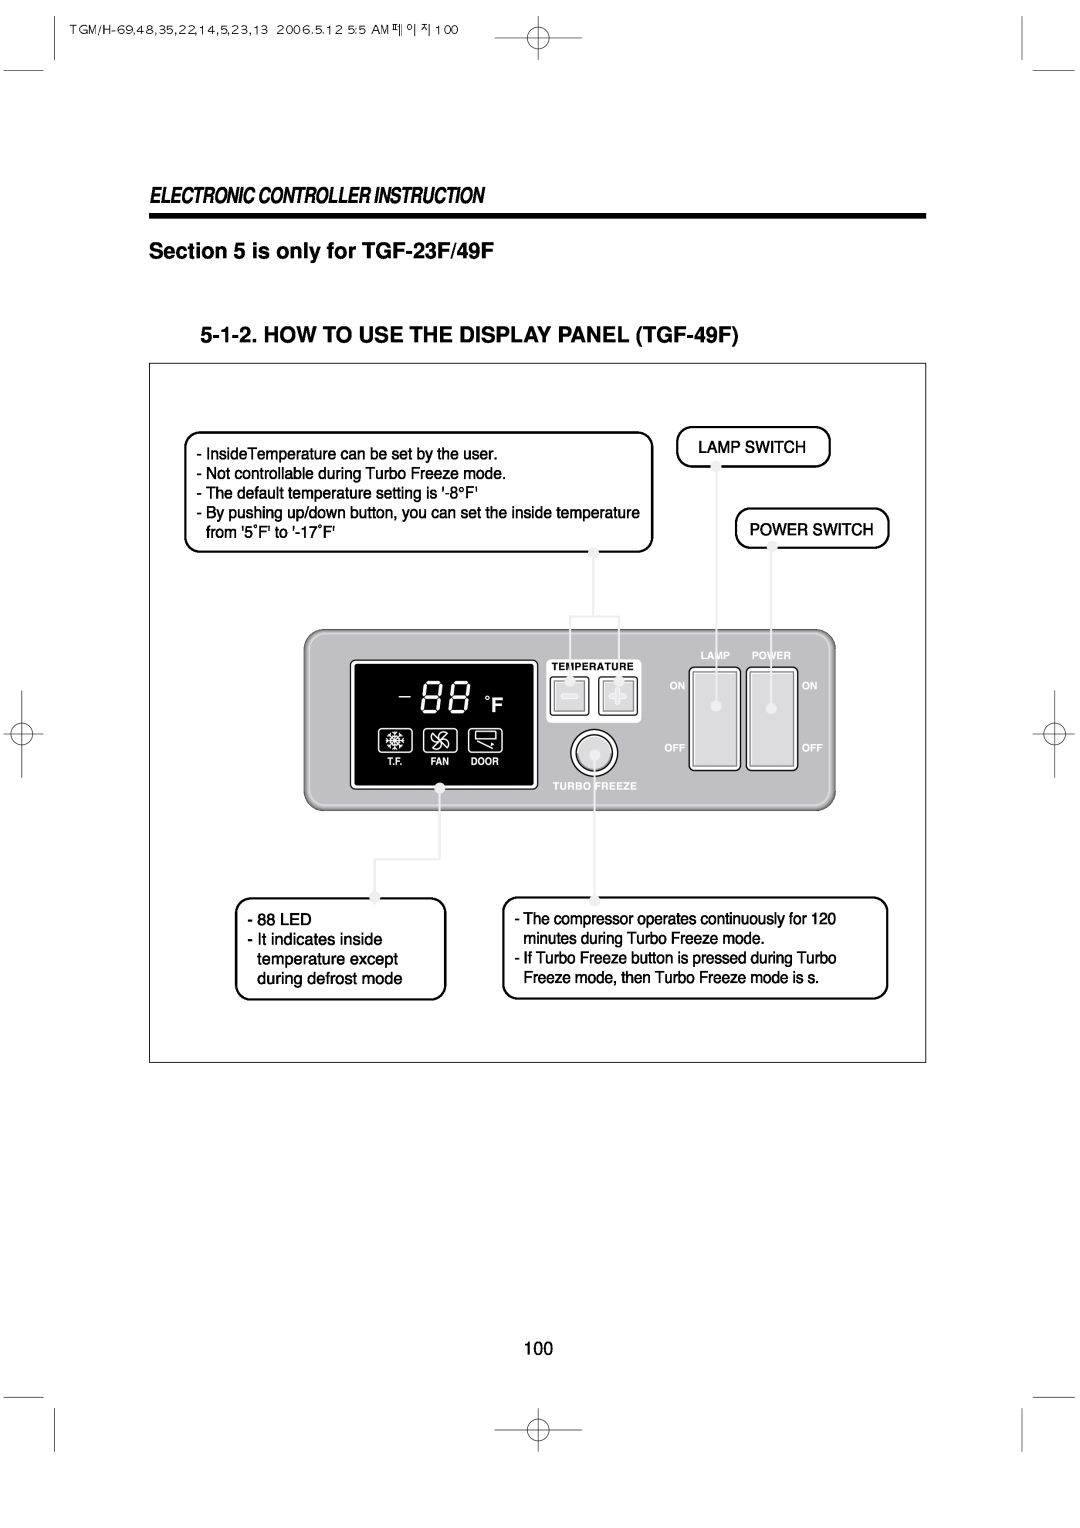 Turbo Air TGF-13F, TGM-5R Electronic Controller Instruction, is only for TGF-23F/49F, HOW TO USE THE DISPLAY PANEL TGF-49F 